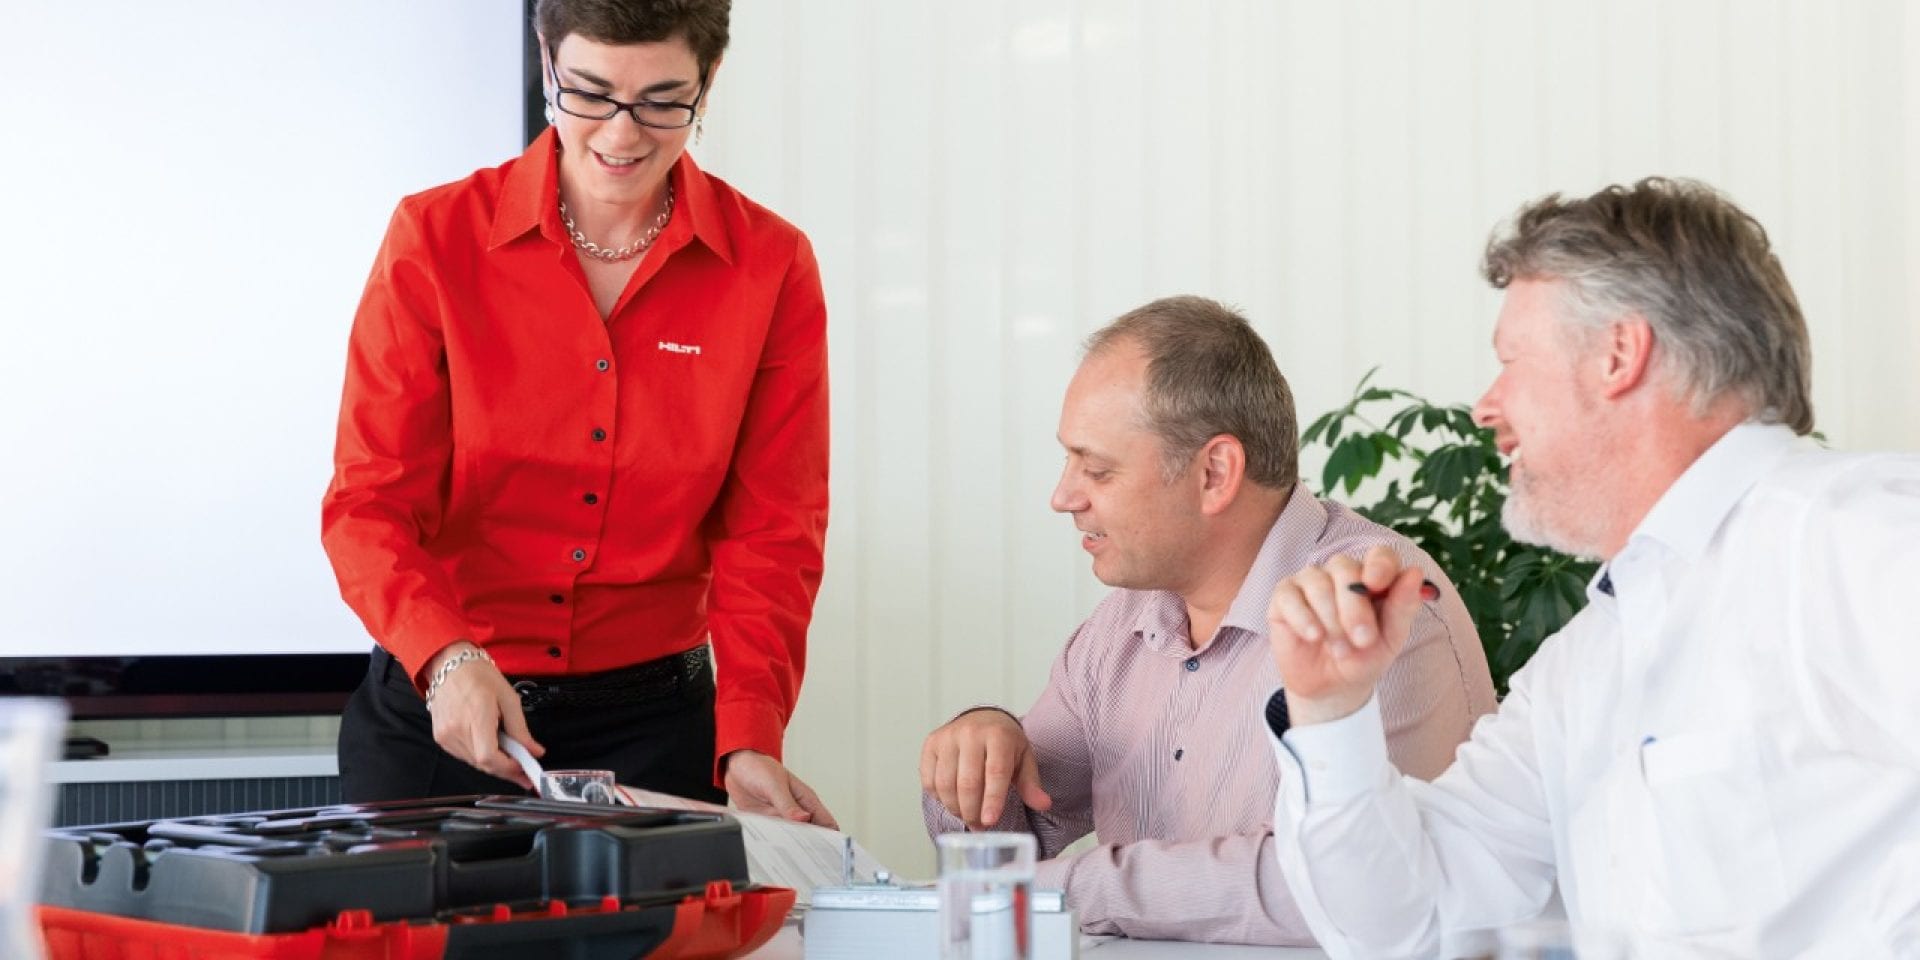 Hilti engineering training for modular support systems